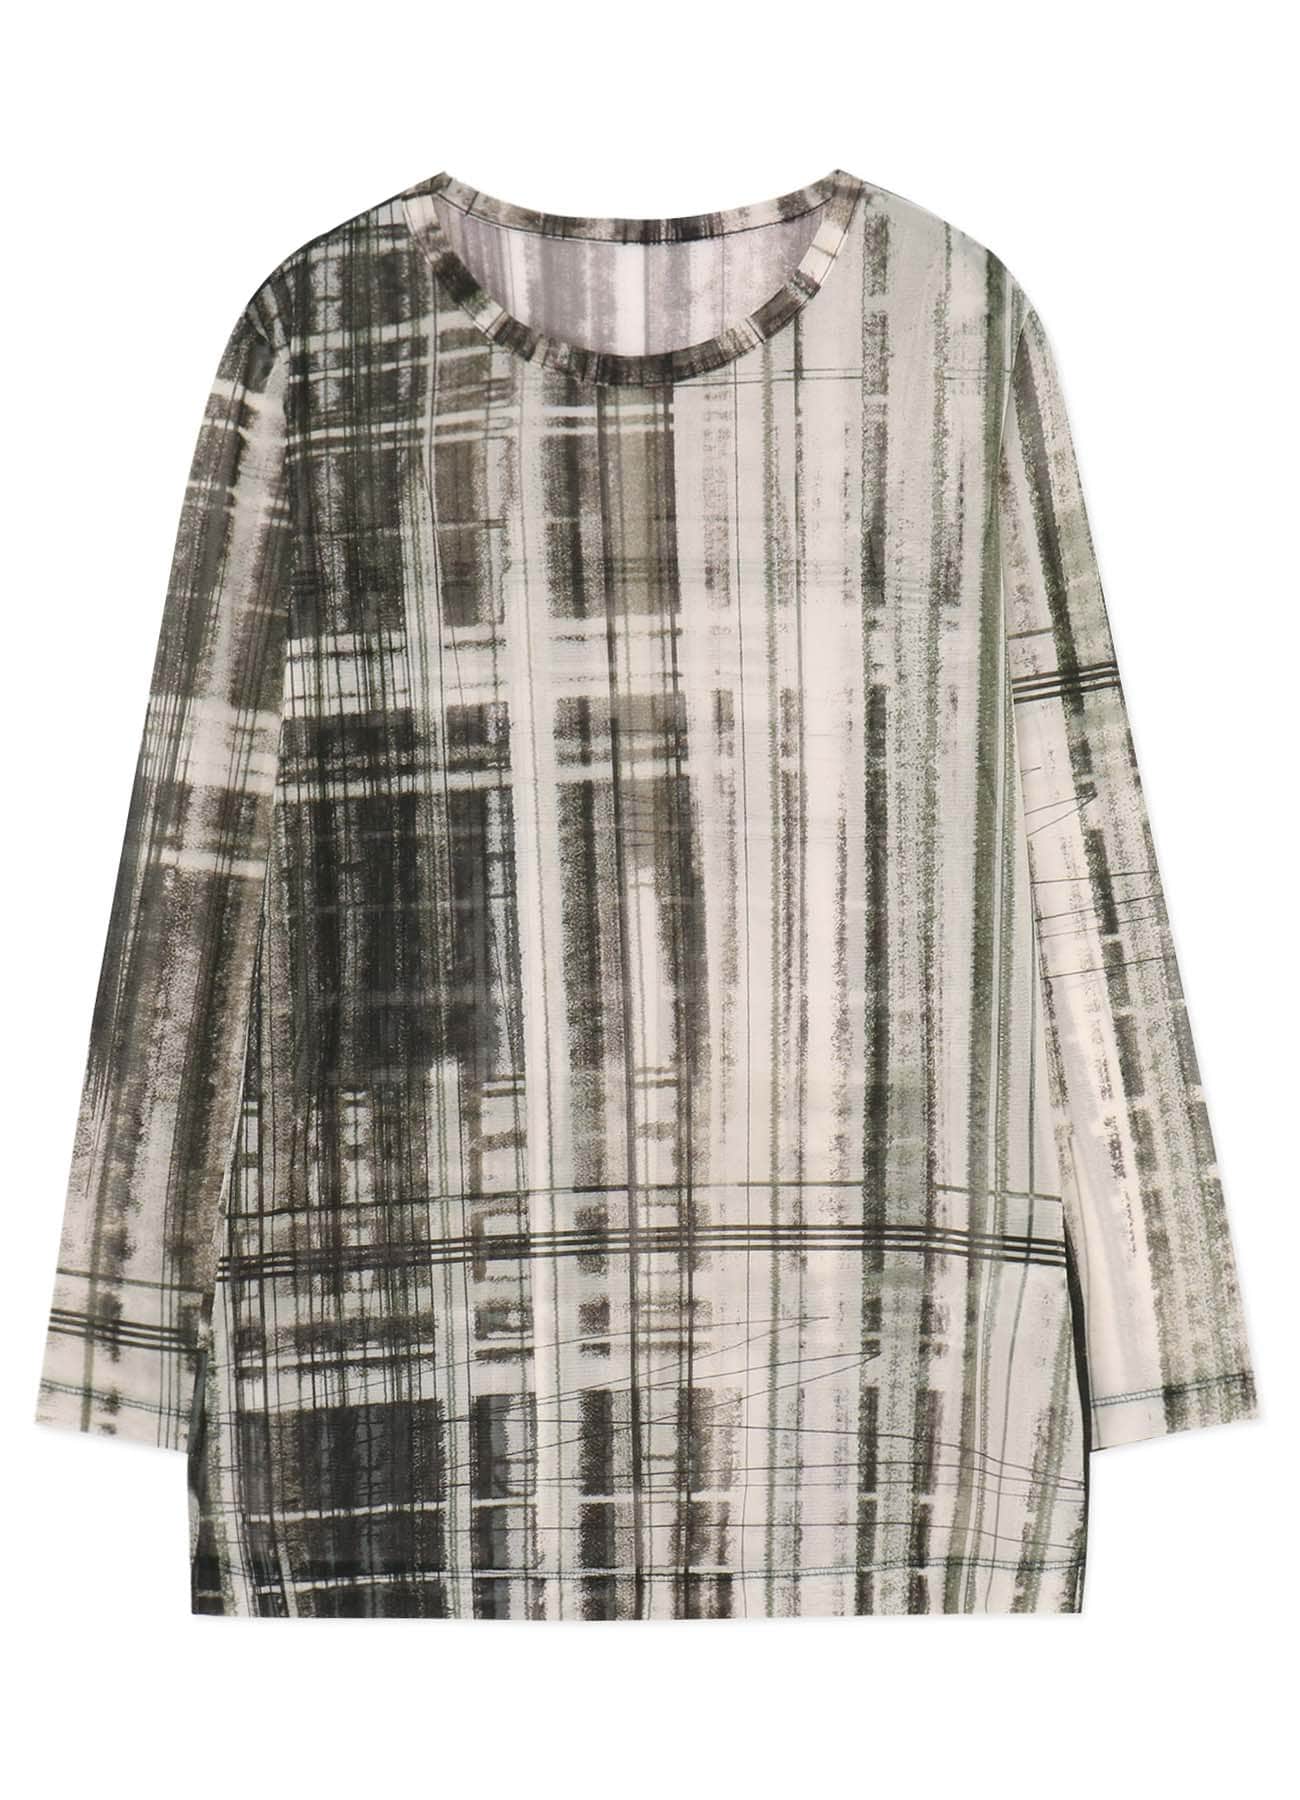 HAND PAINTED PLAID PRINT LONG SLEEVE SHORT DRESS(S Off White): Y's 